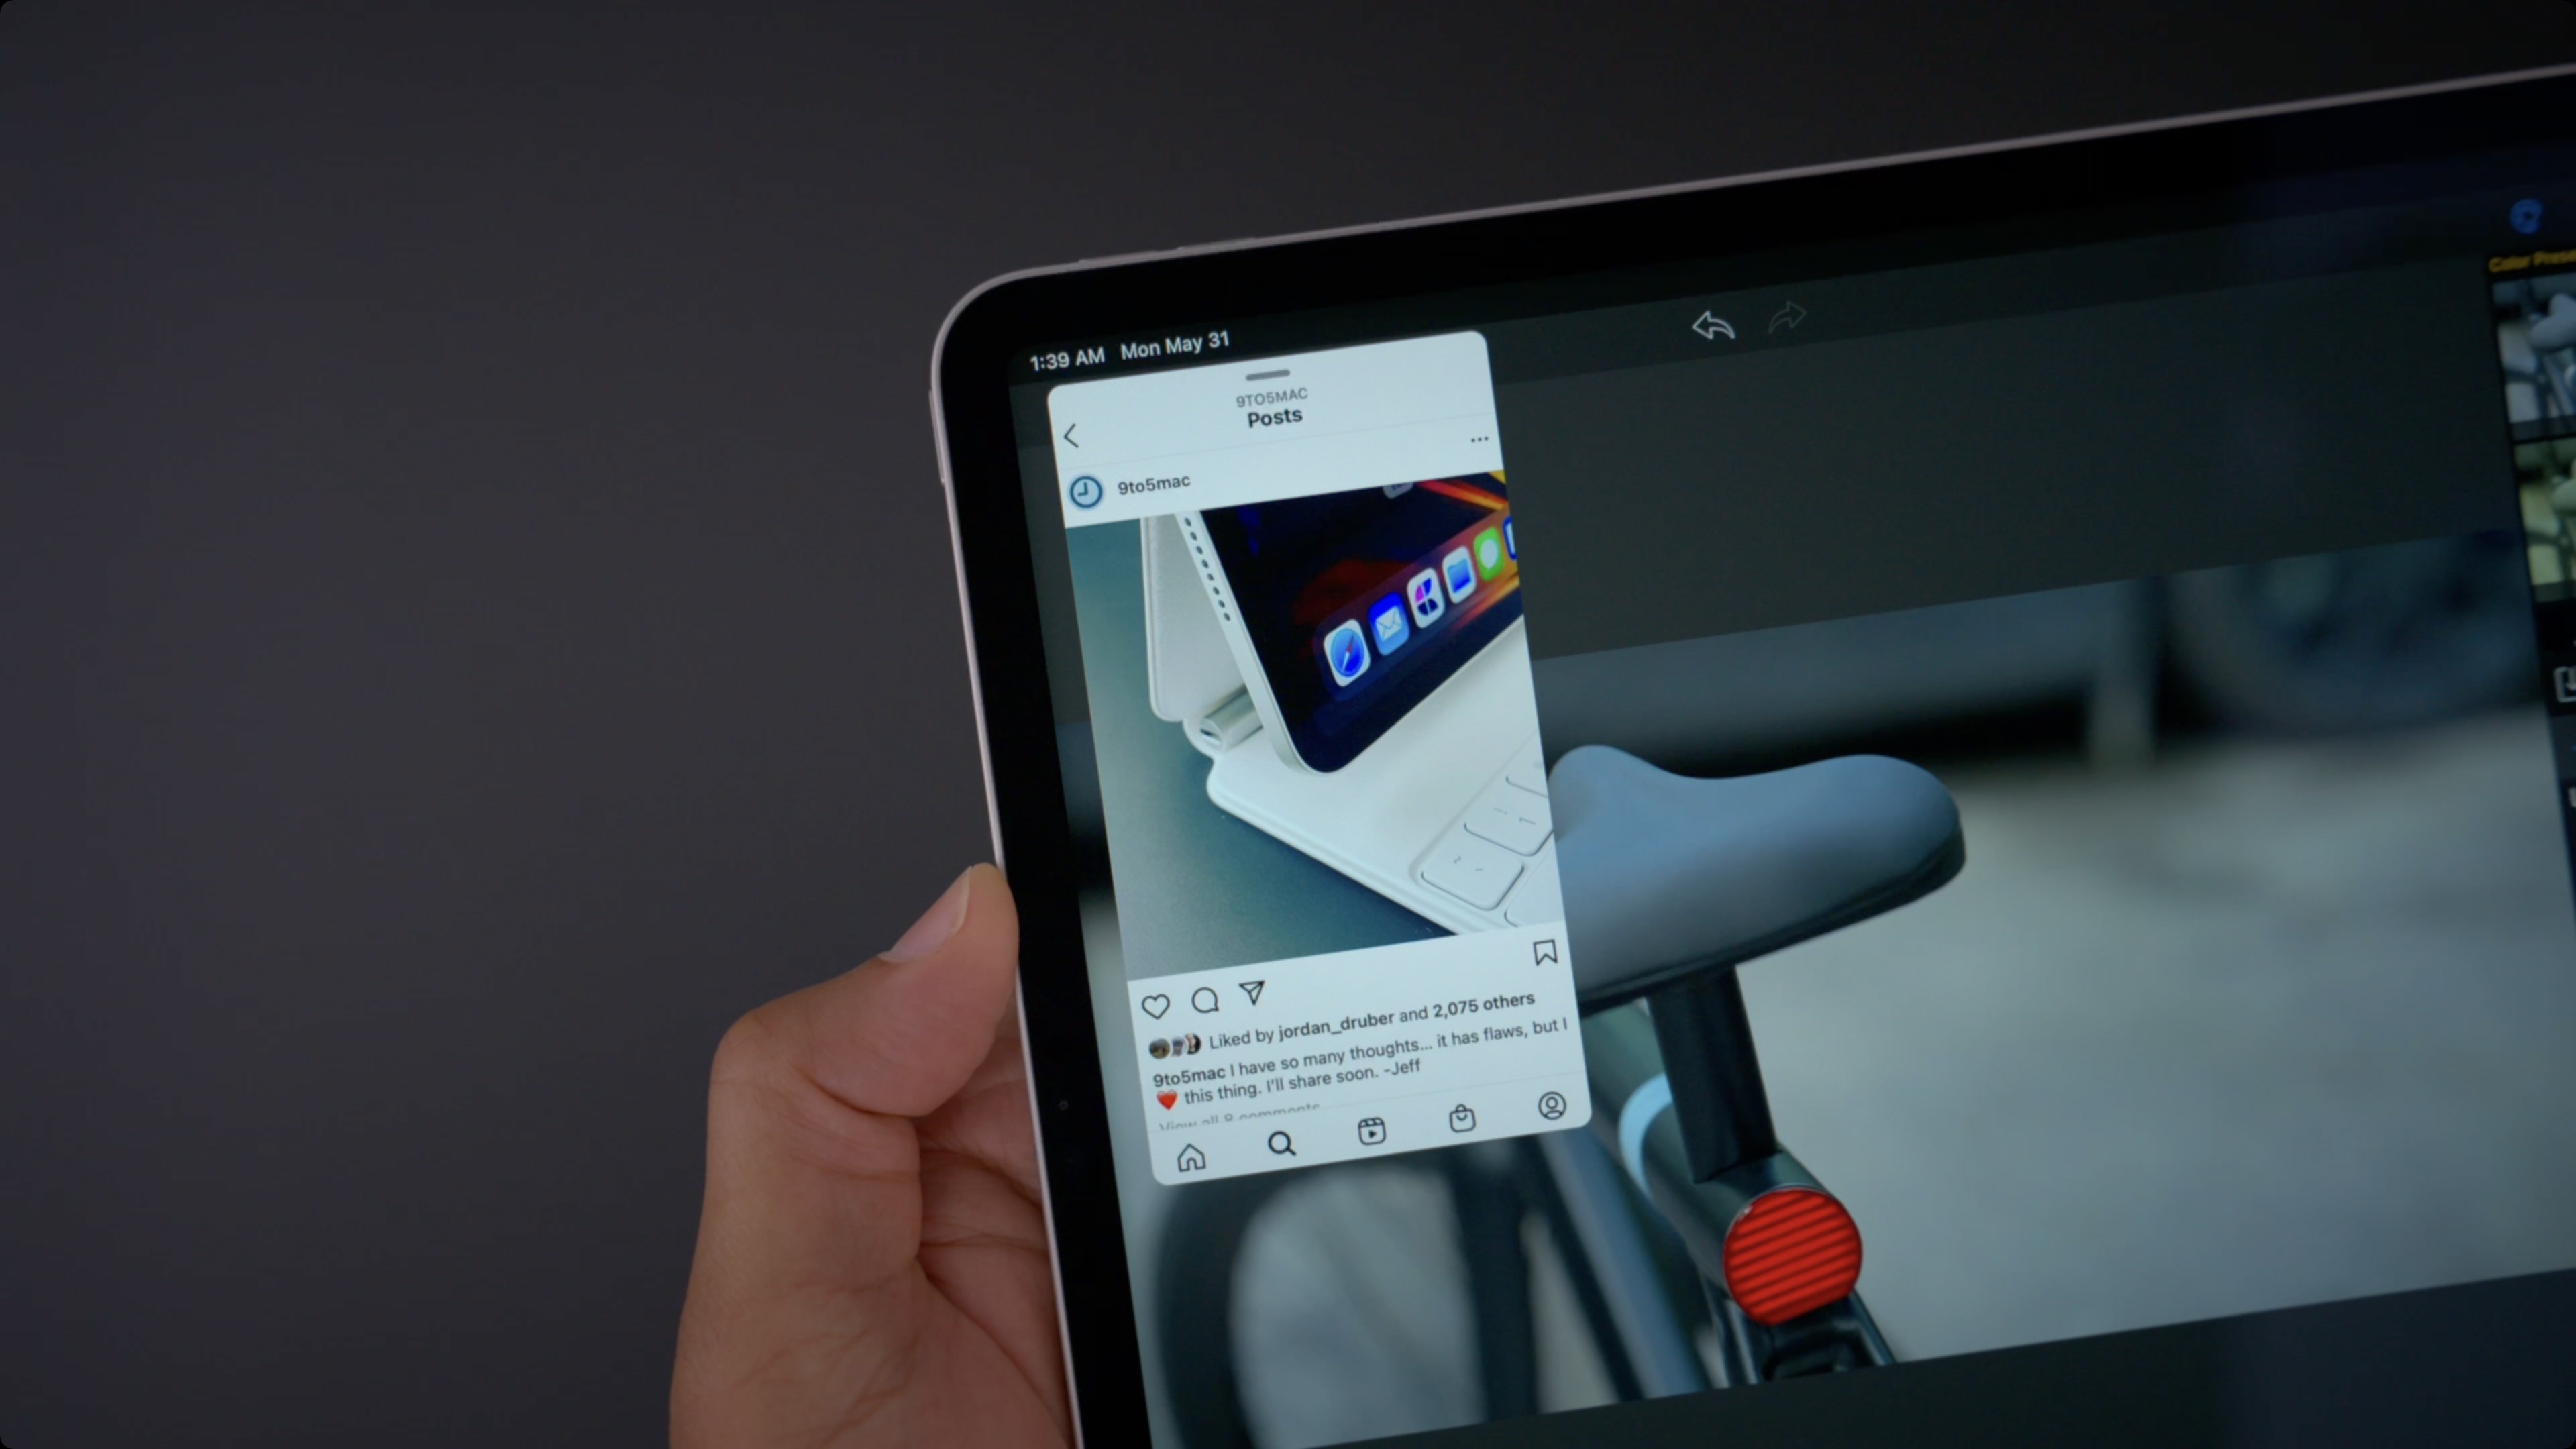 iPad Pro (2021) review: Apple's hardware may have outpaced its